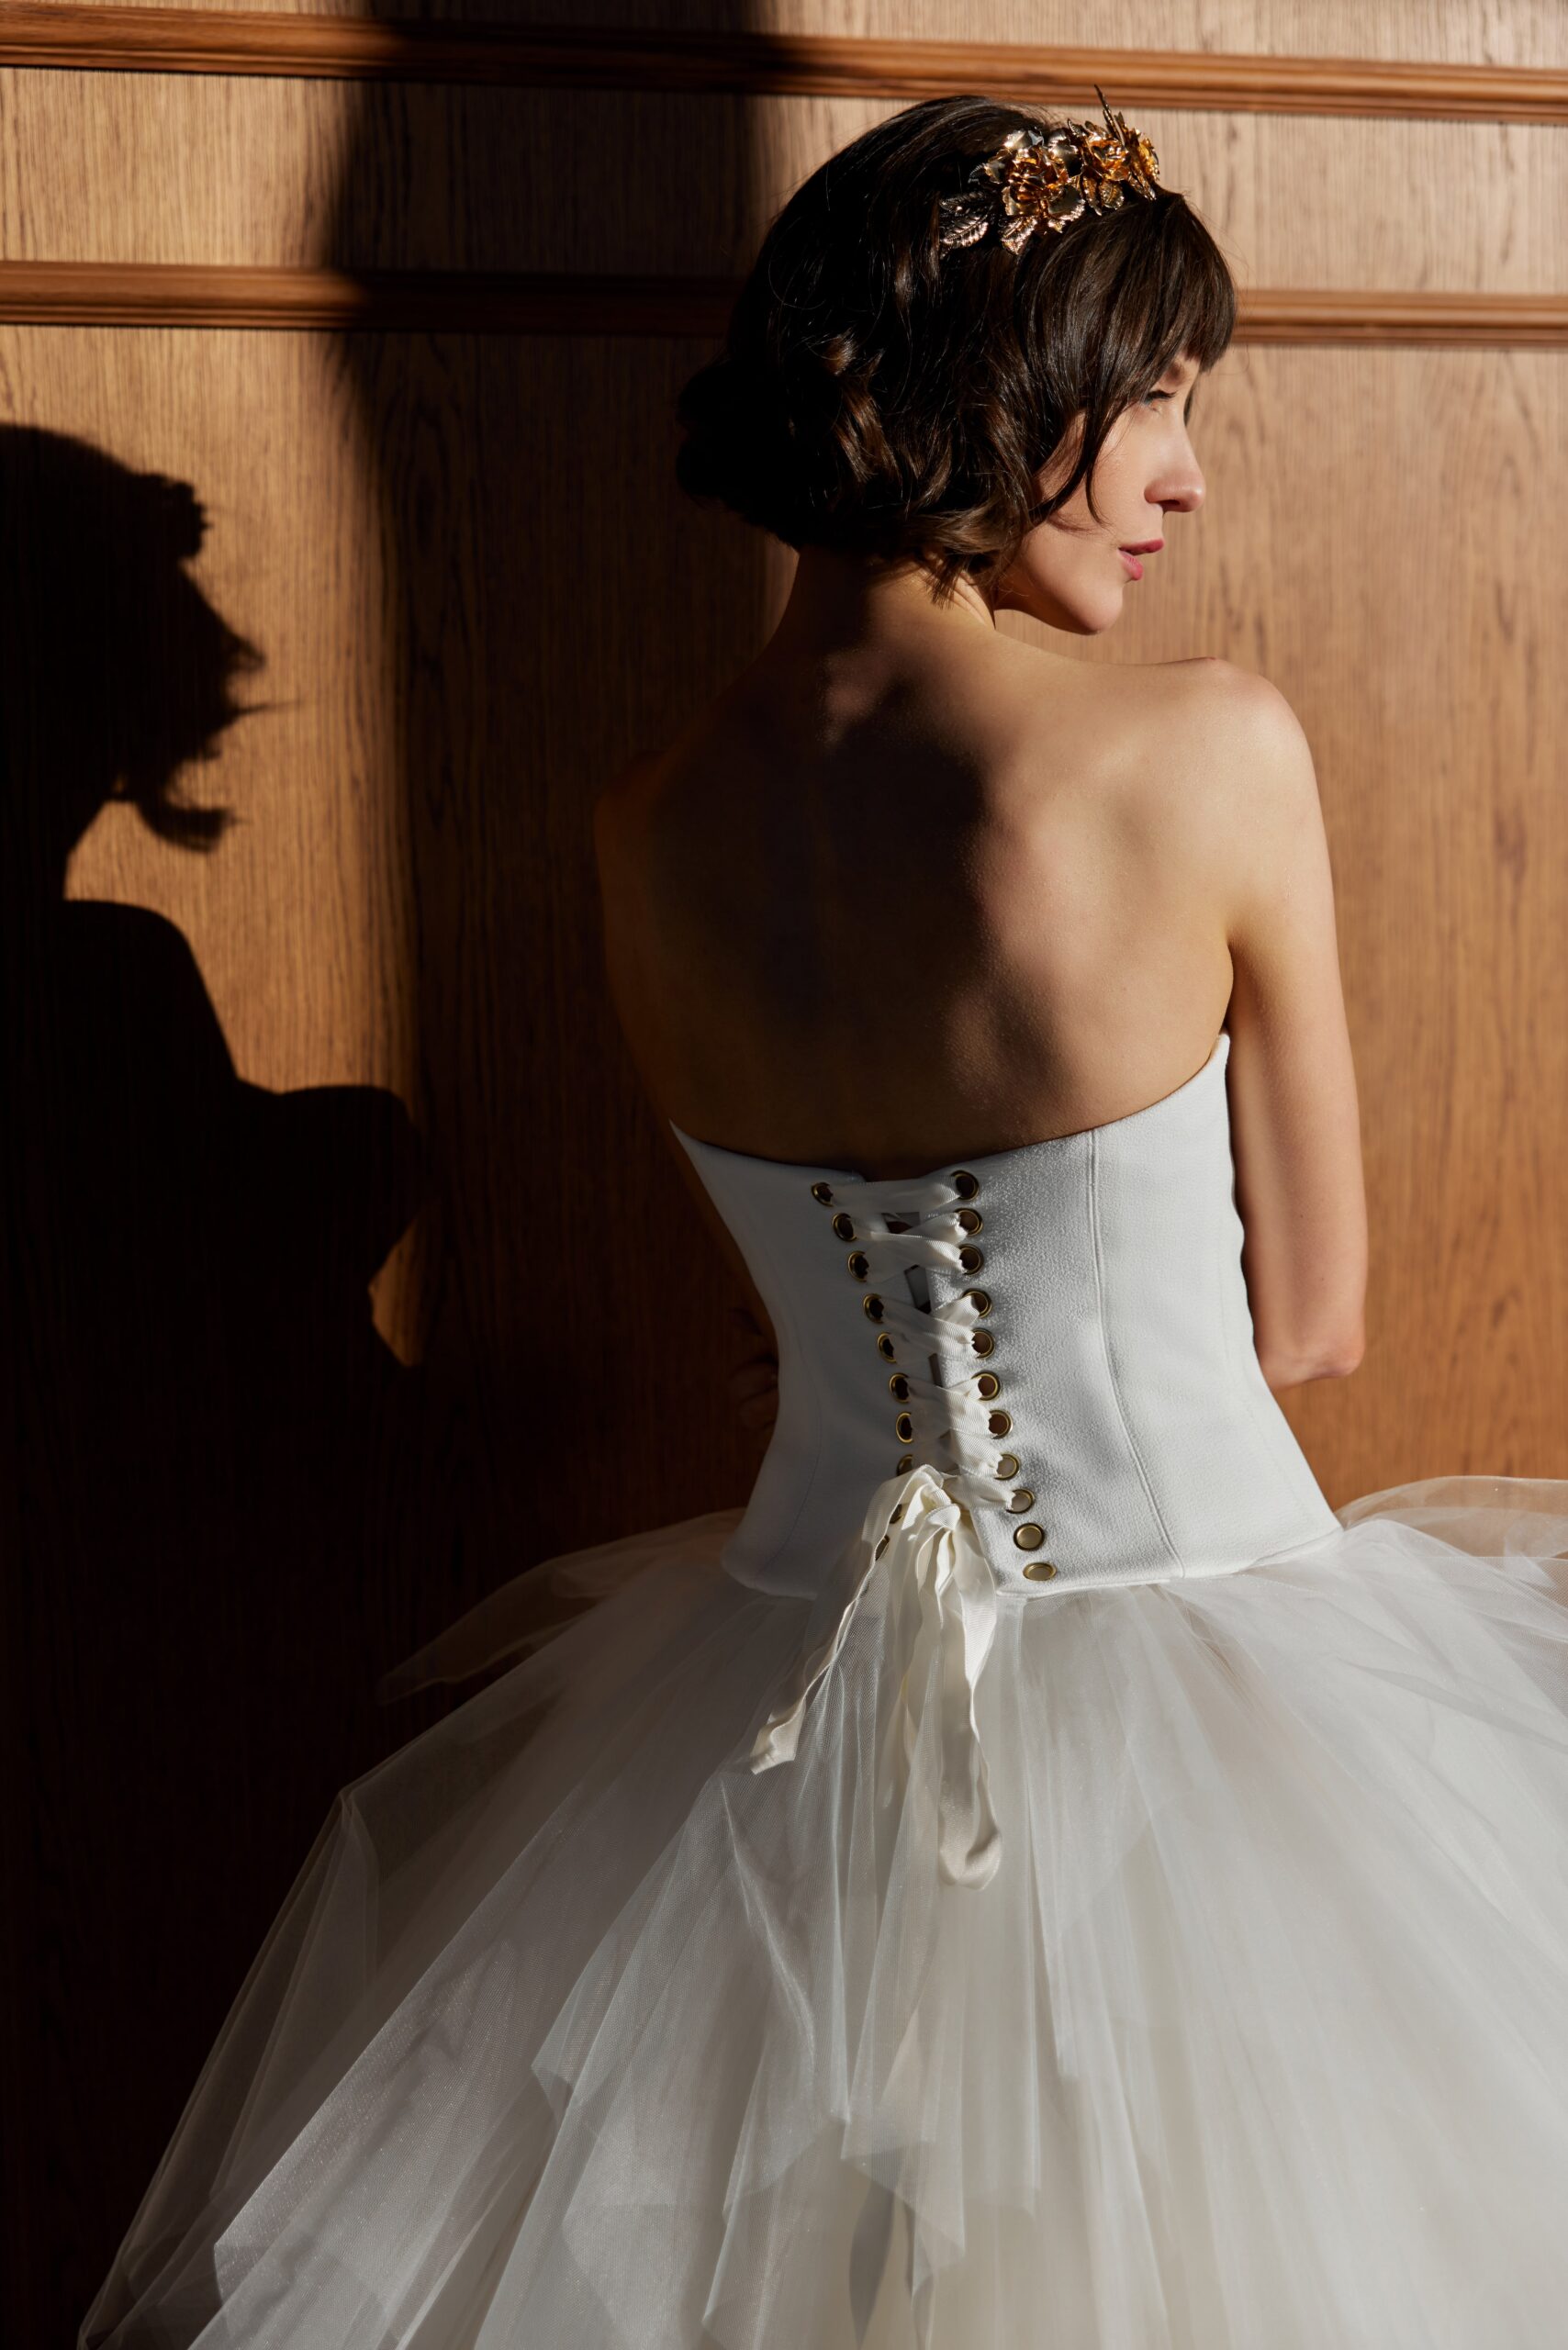 Zelie top and Frou Frou skirt - a strapless corset style bodice with a lace up back worn with a decadent ruffled tulle skirt.